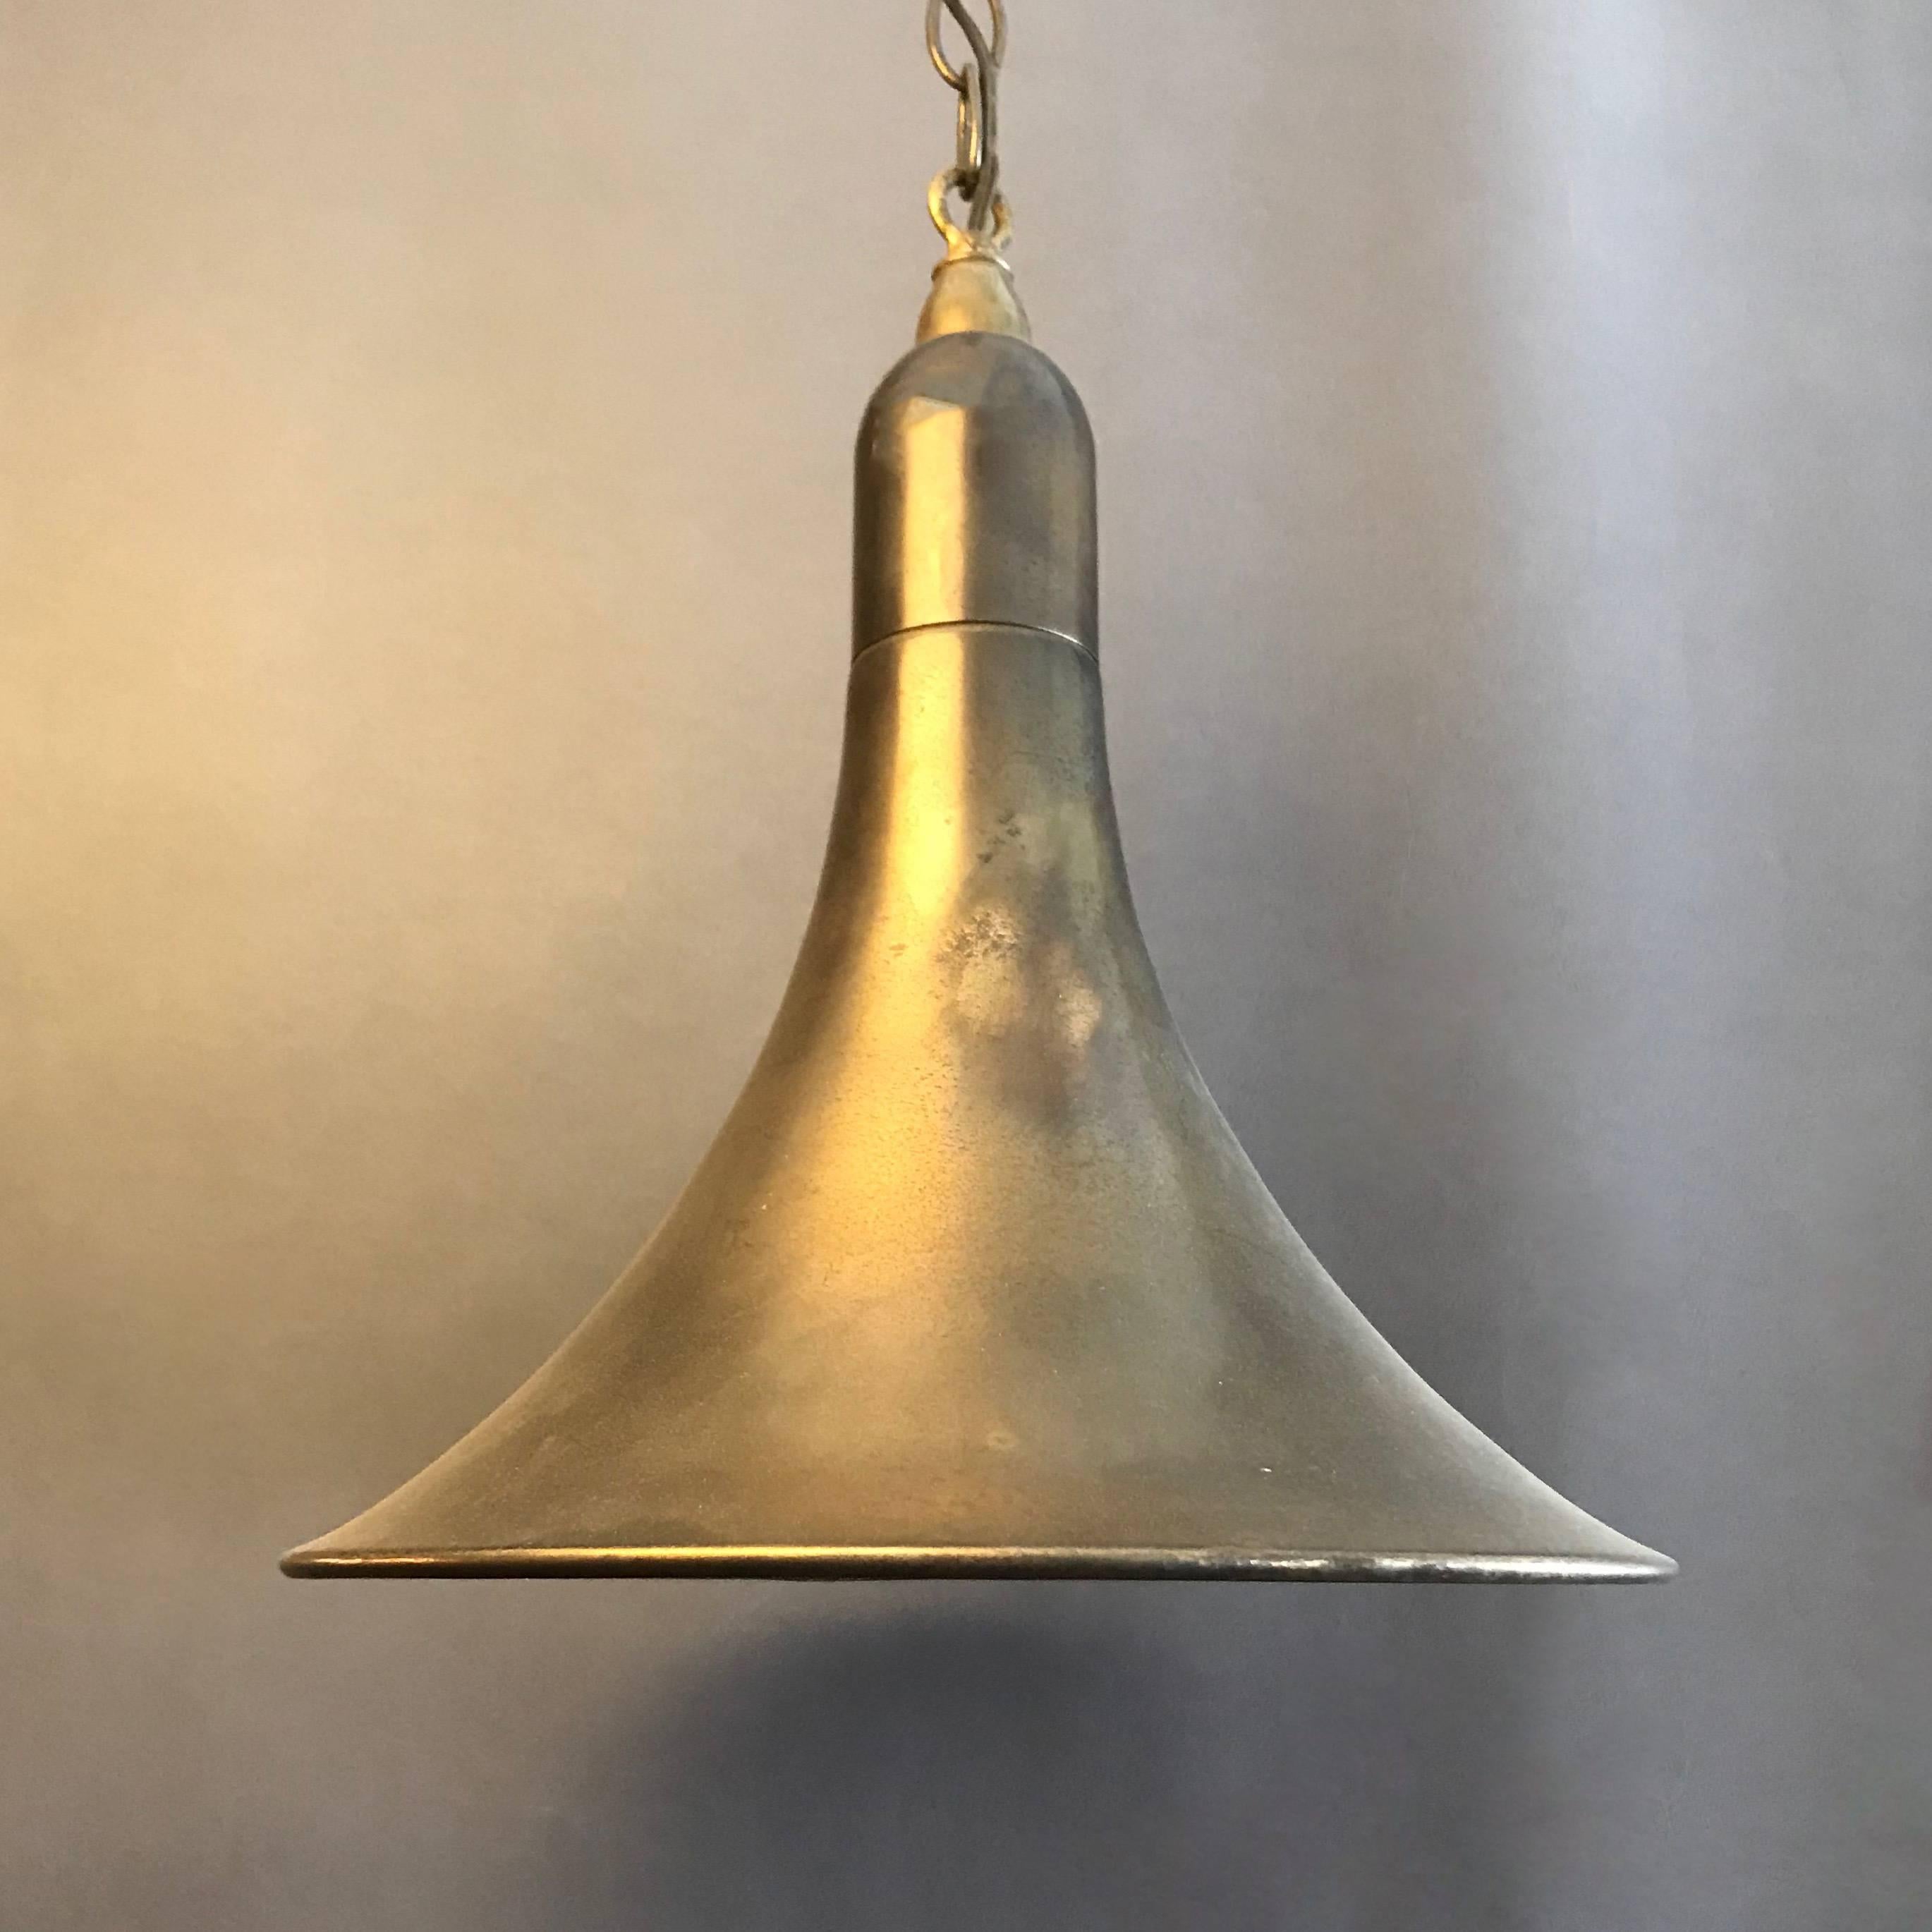 Industrial pendant light features a tapered, funnel-shape shade in gunmetal finish that is newly wired with brass chain and canopy.